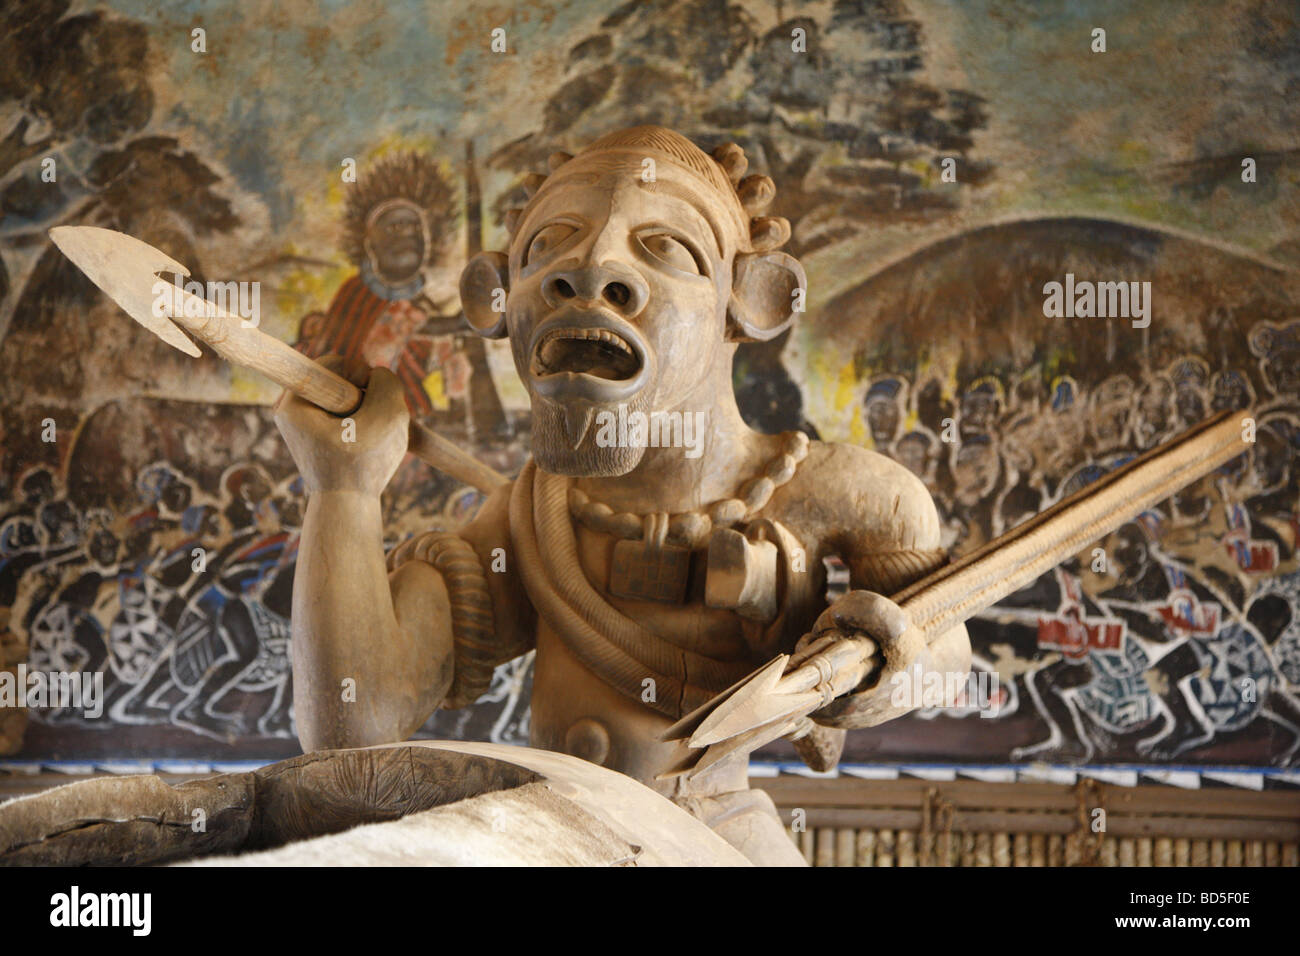 Woodcarved warrior in the Tam-Tam House, Foumban, Cameroon, Africa Stock Photo